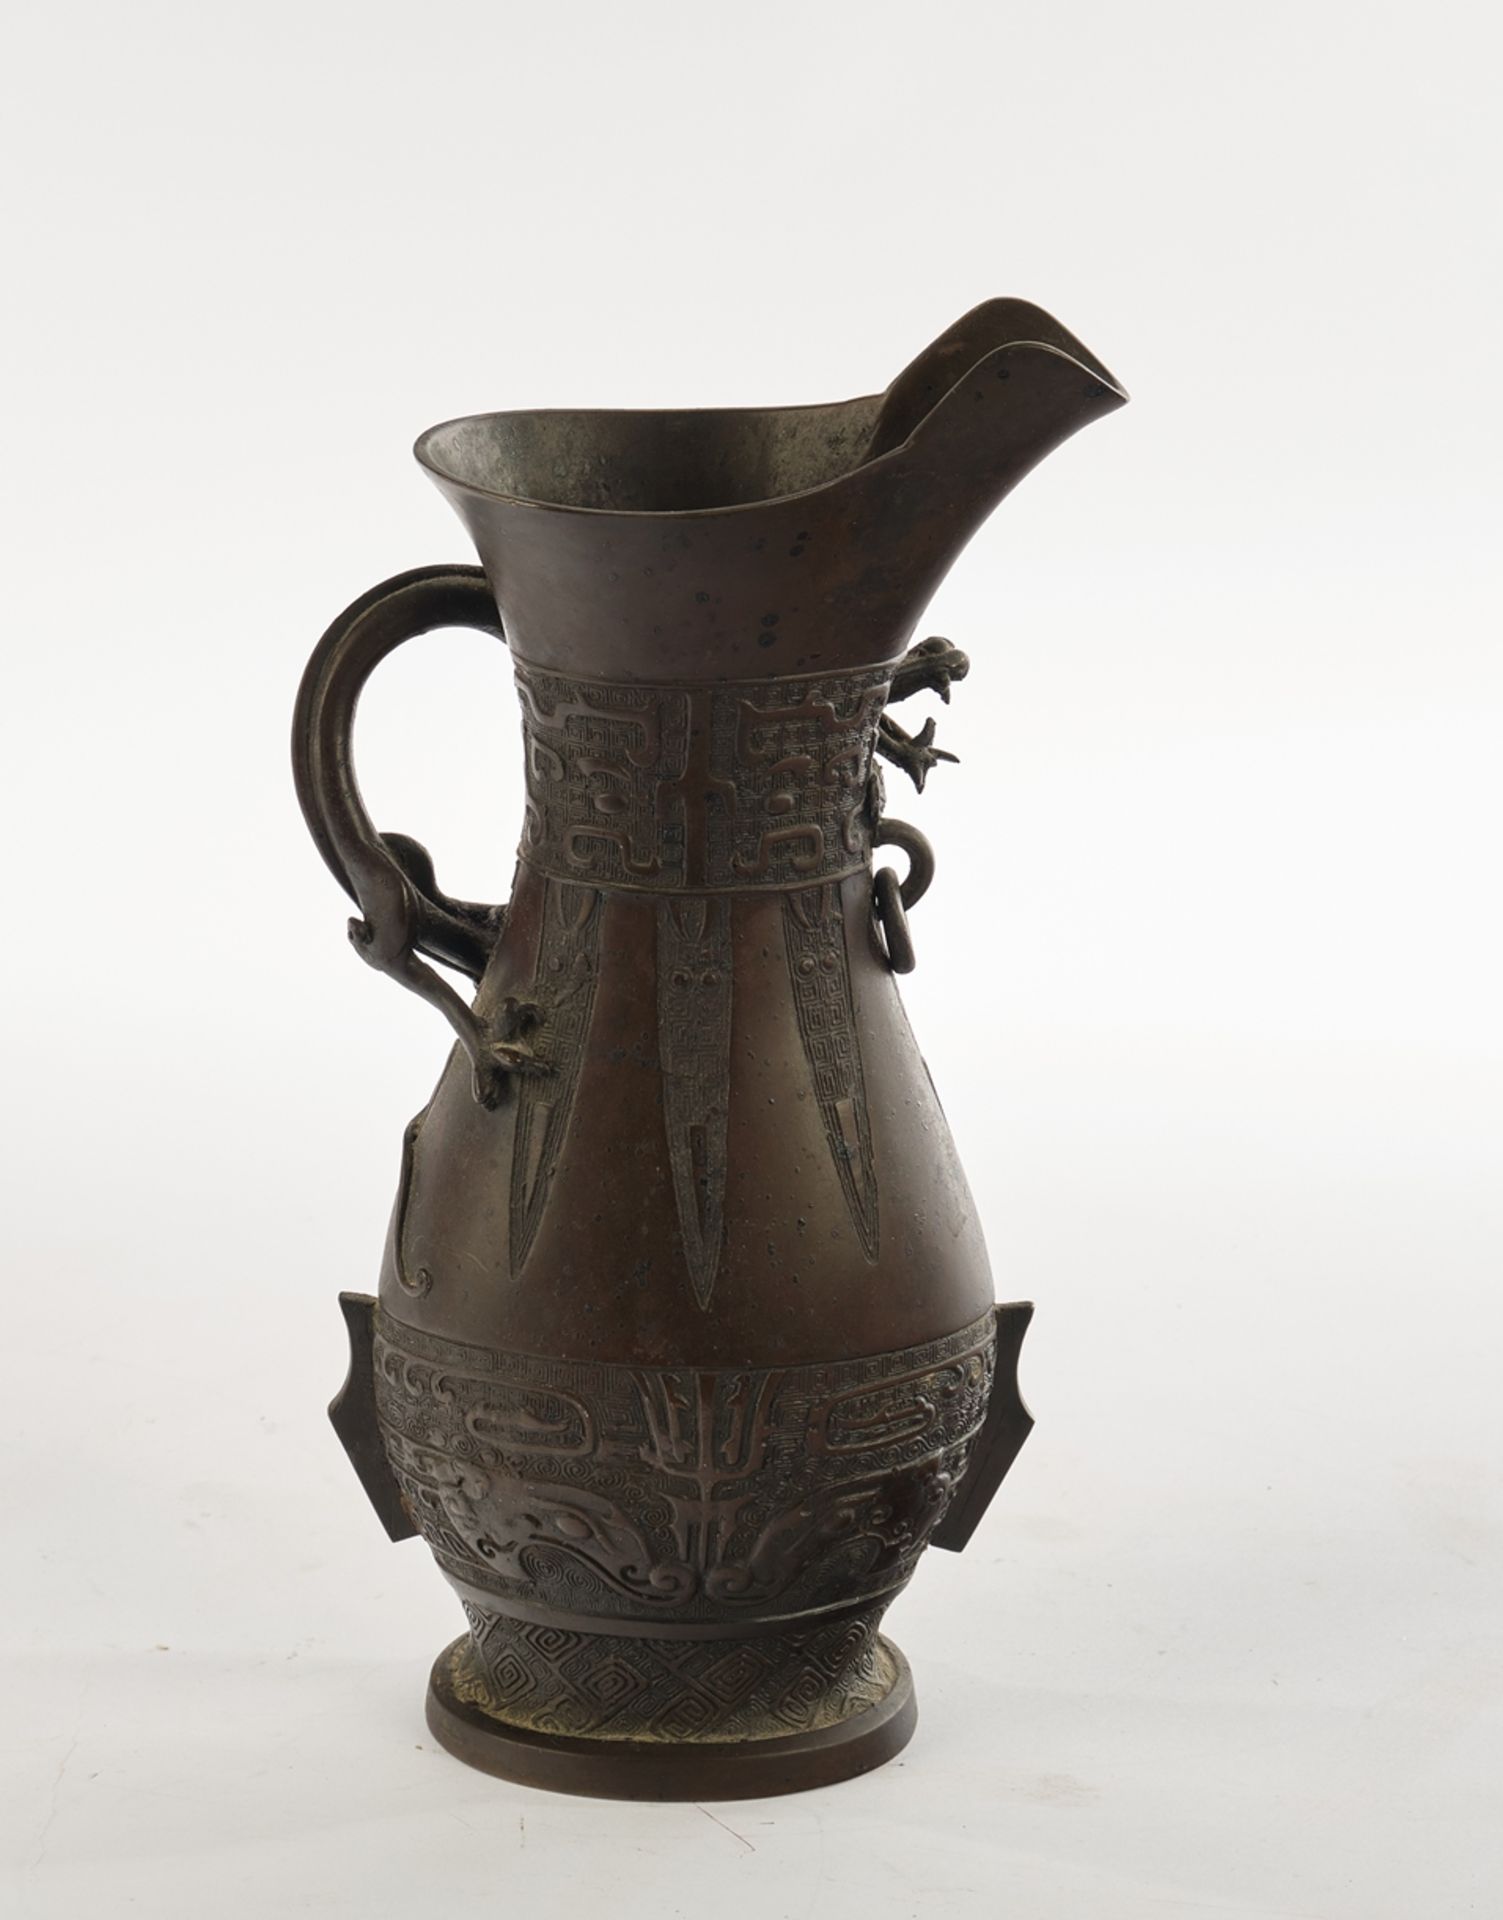 Jug, Japan, c. 1900, bronze, dark patina, archaic decoration in Chinese style, handle in the shape  - Image 2 of 3